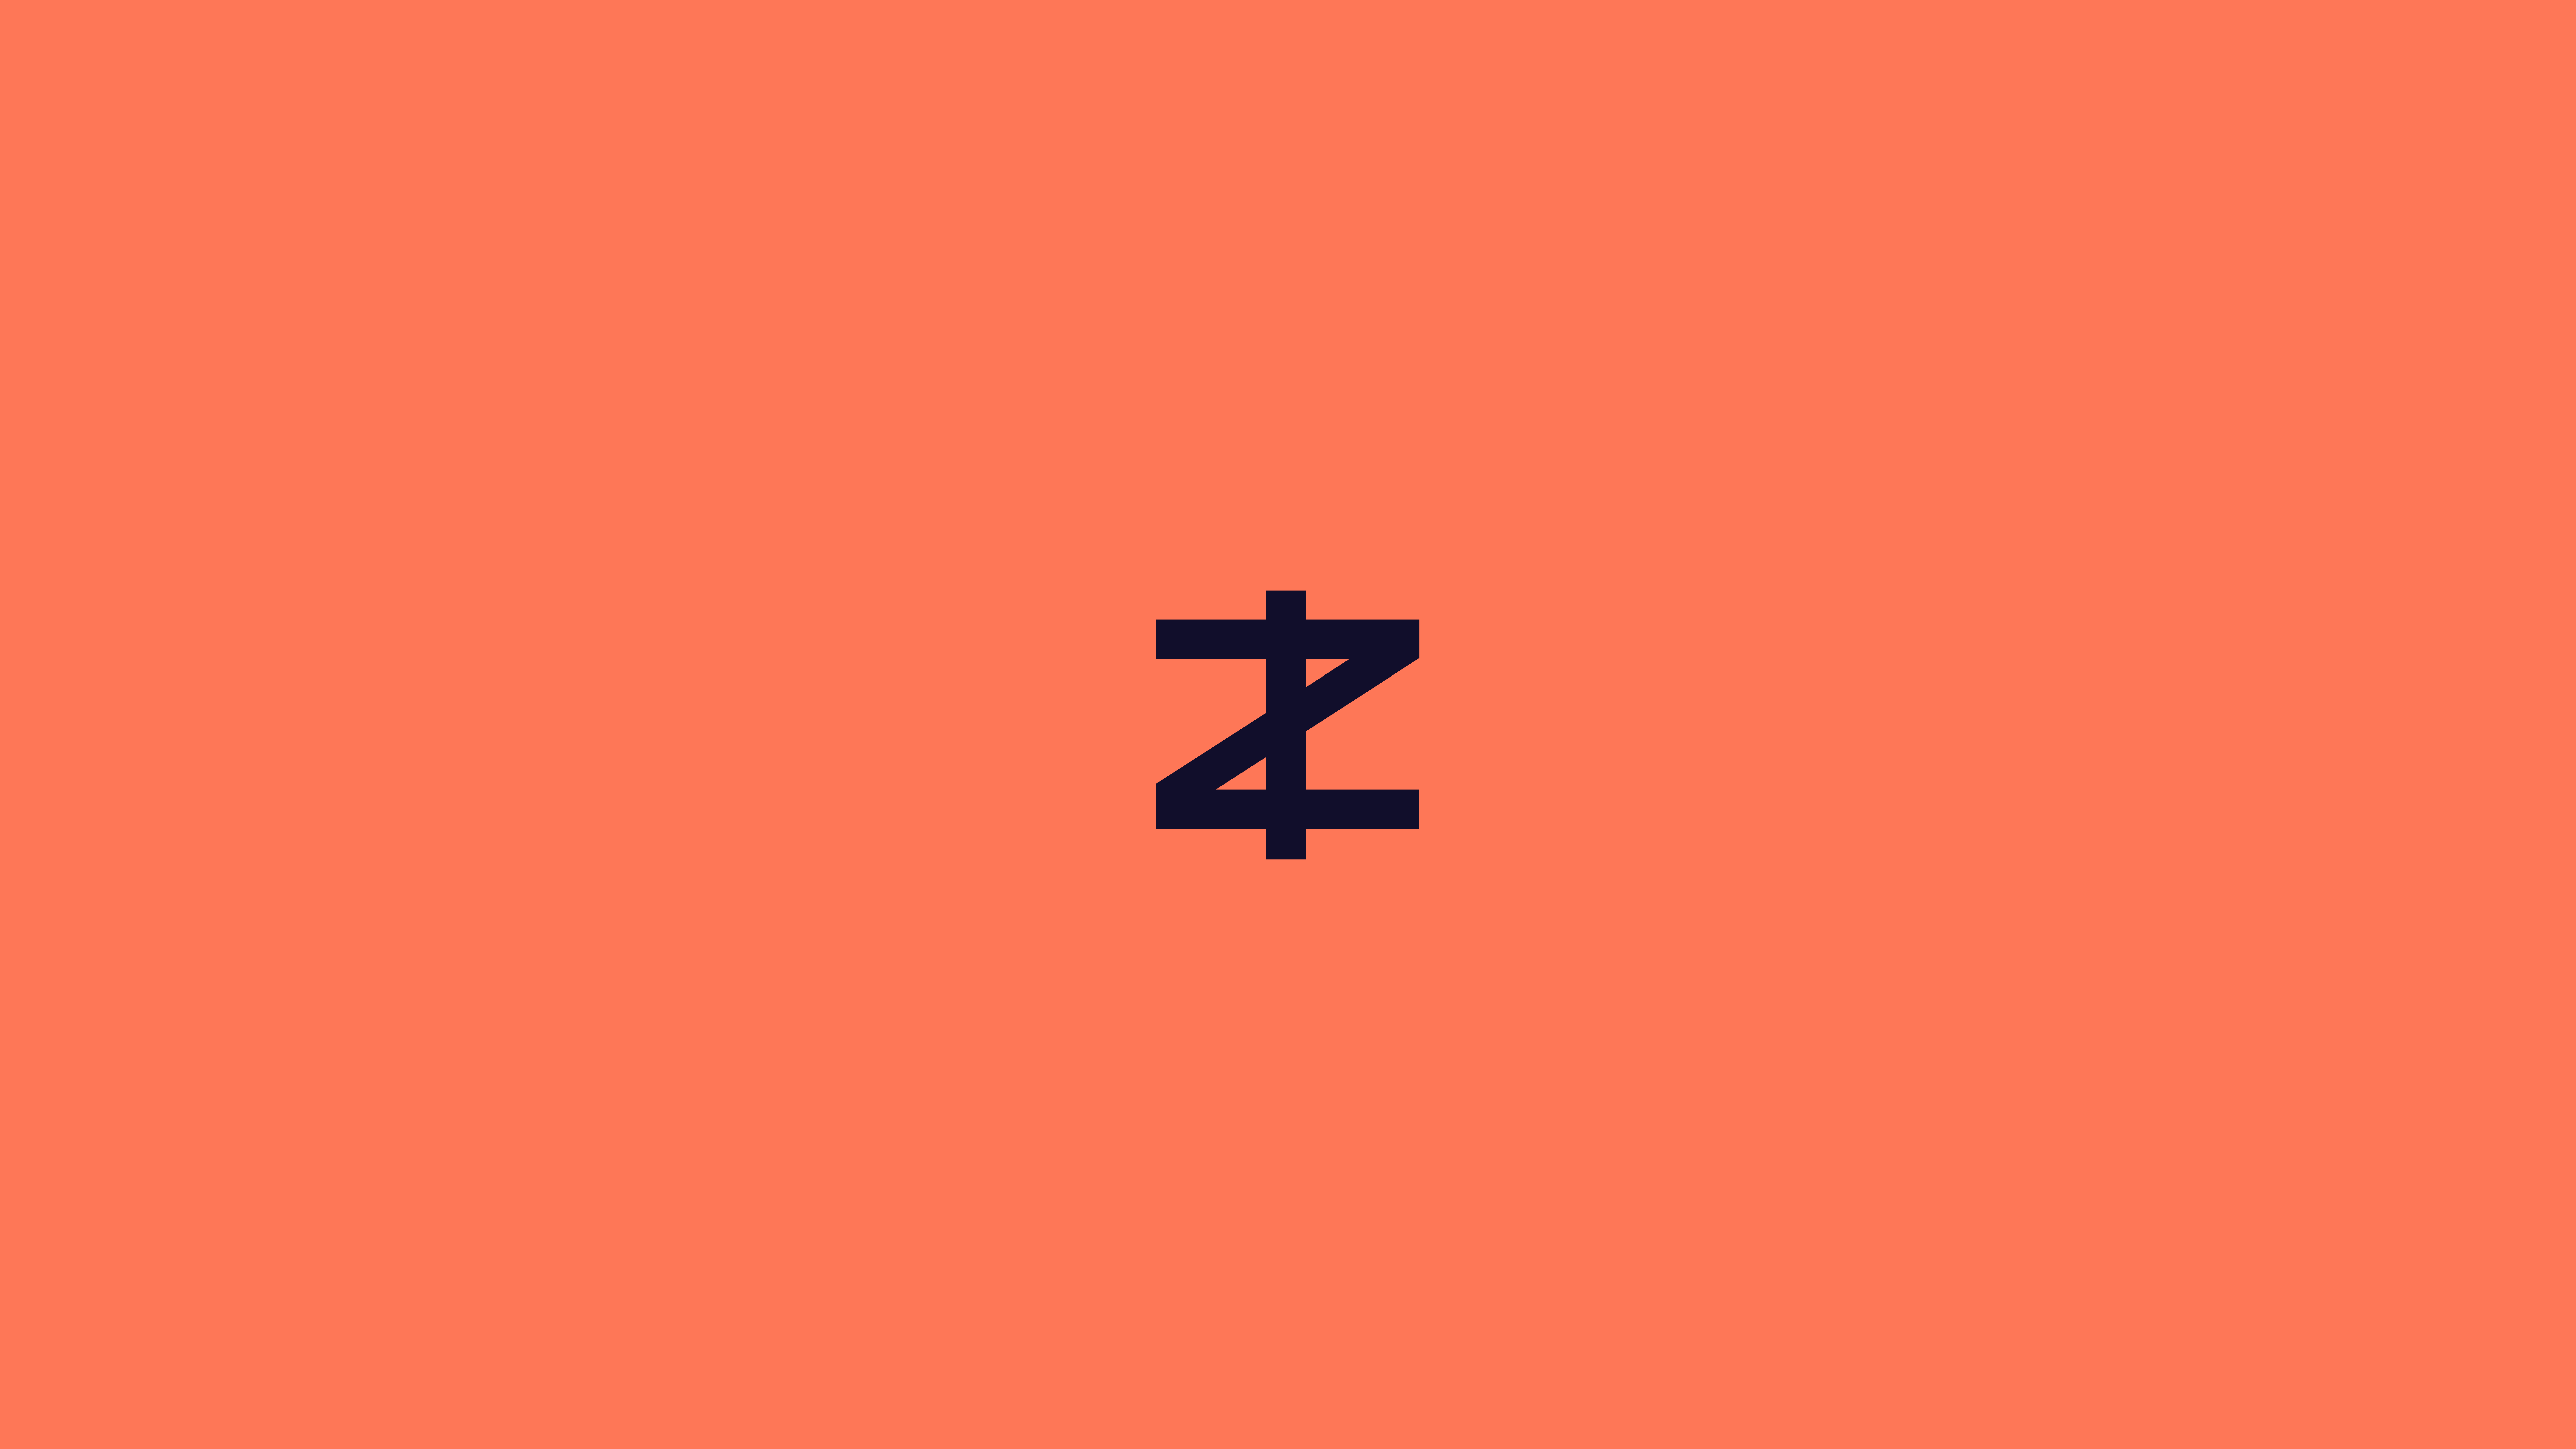 A 'Z' icon with a line through it to make it look like a currency symbol for Zcash